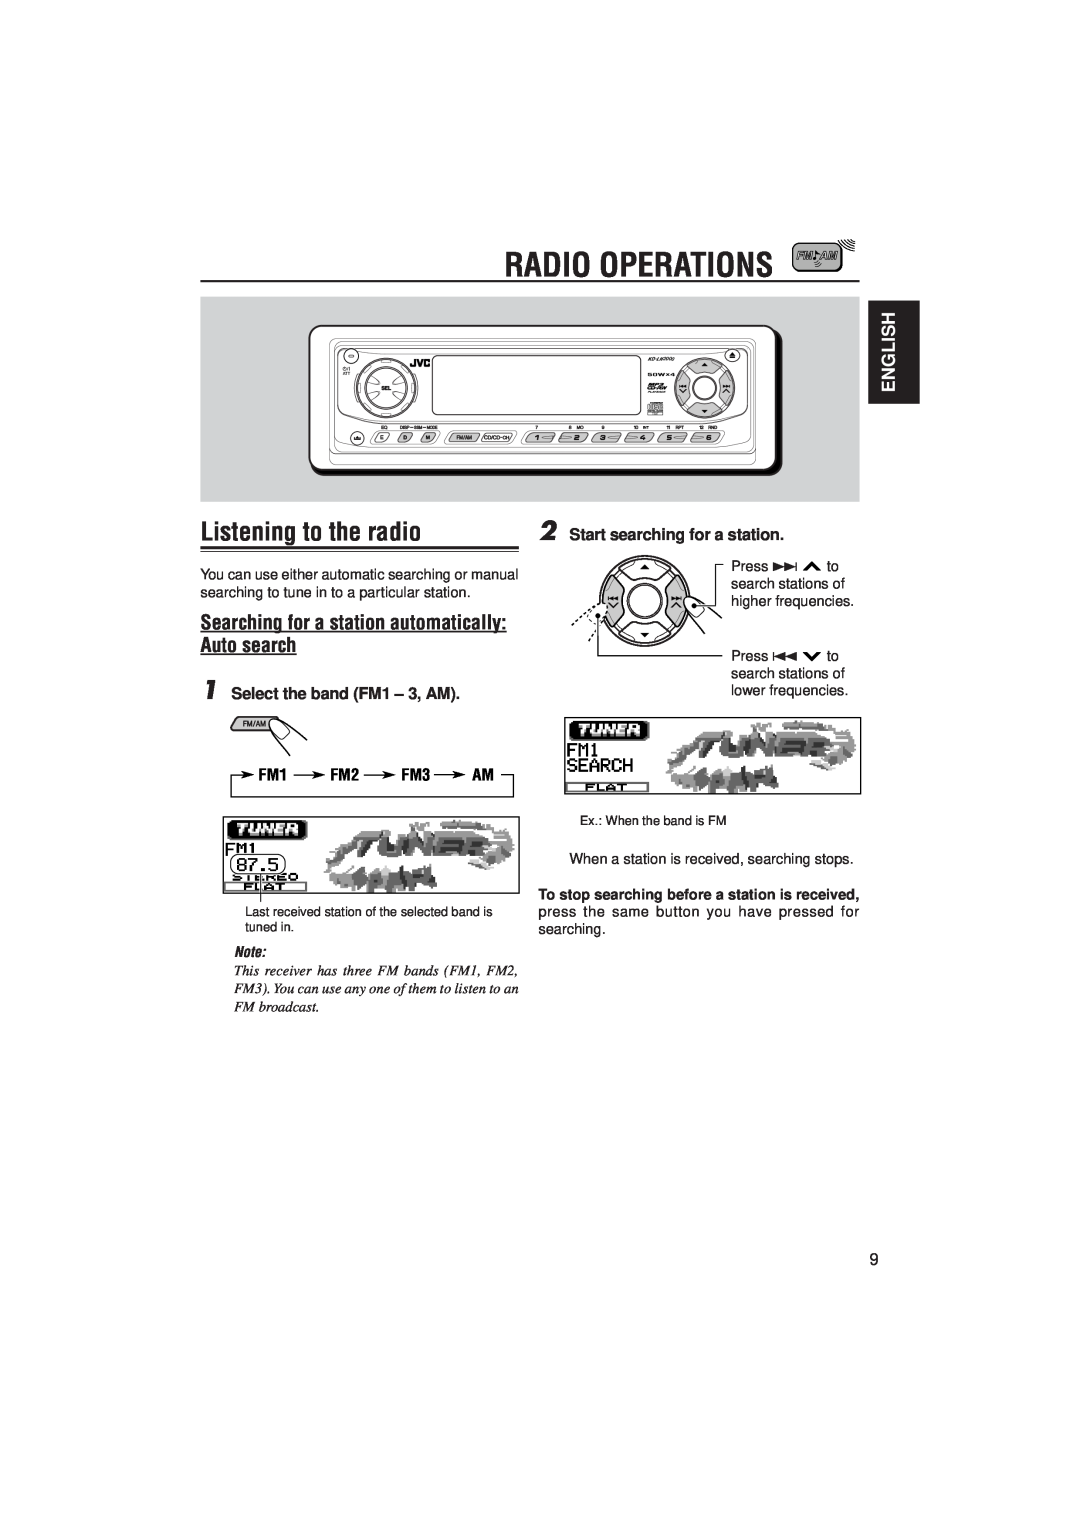 JVC IKD-LH2000 manual Radio Operations, Listening to the radio, English, Press 4 to search stations of lower frequencies 